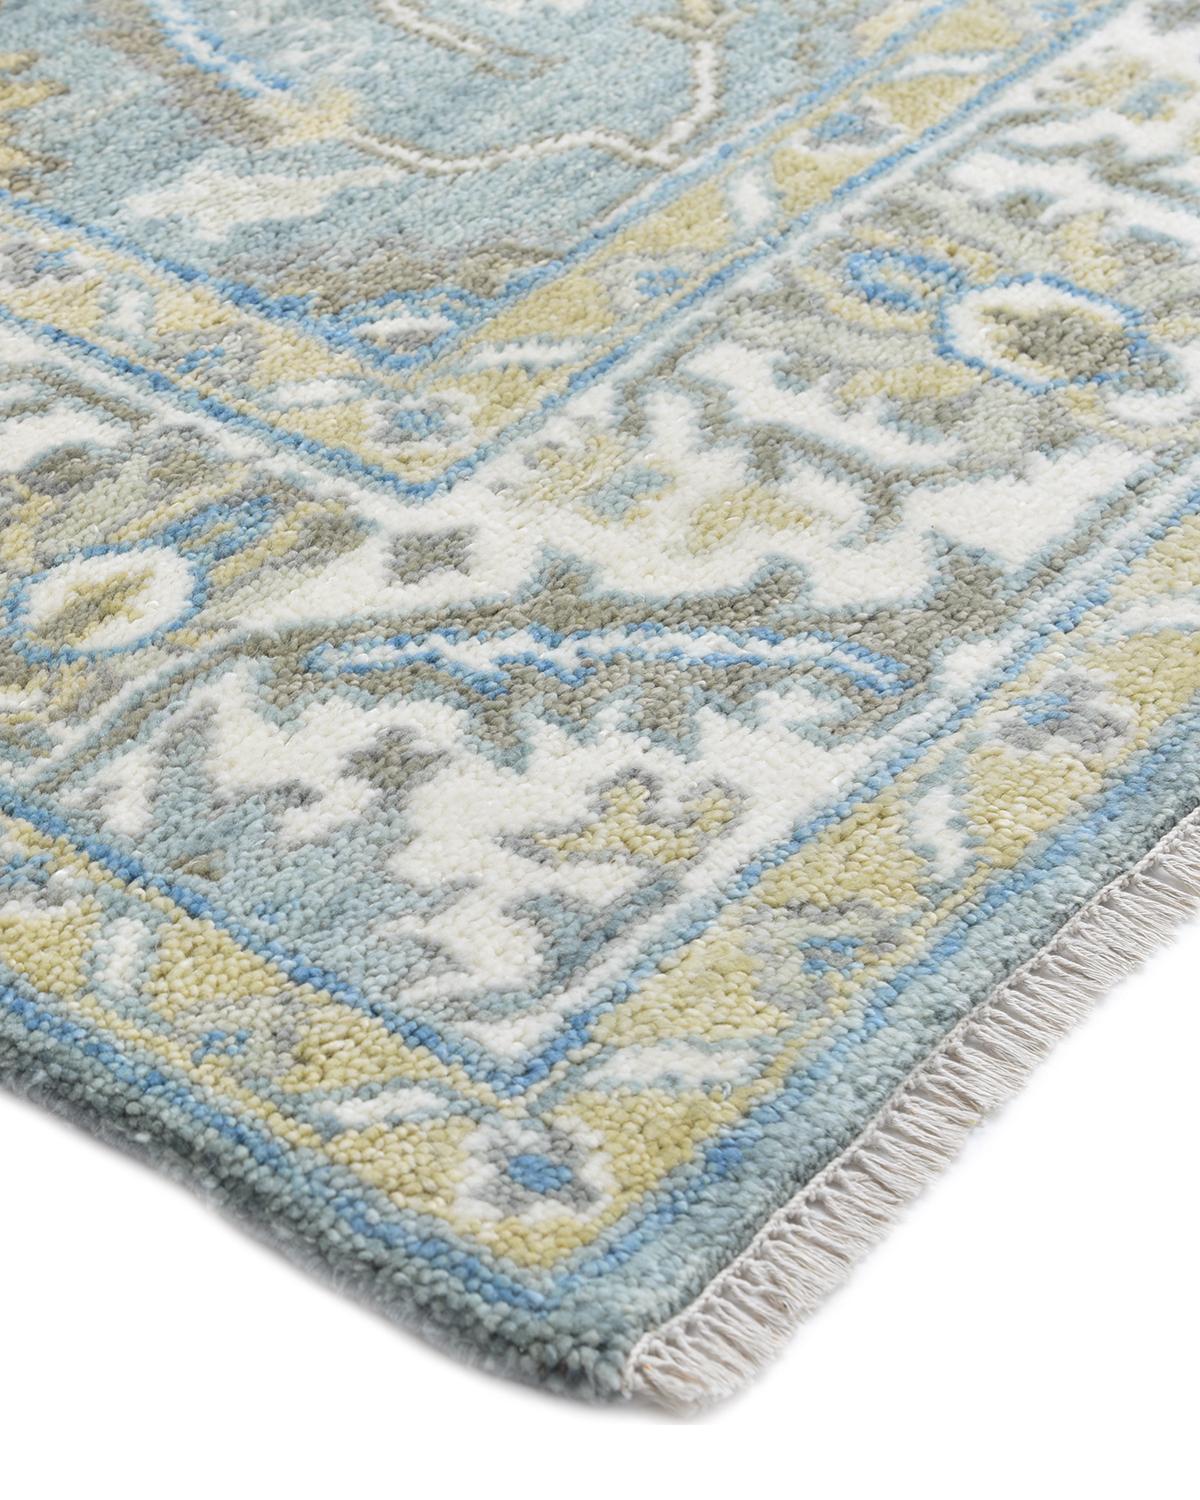 Originating centuries ago in what is Now Turkey, Oushak rugs have long been sought after for their intricate patterns, lush yet subtle colors, and soft luster. These rugs continue that tradition. hand knotted of wool by skilled artisans, they will